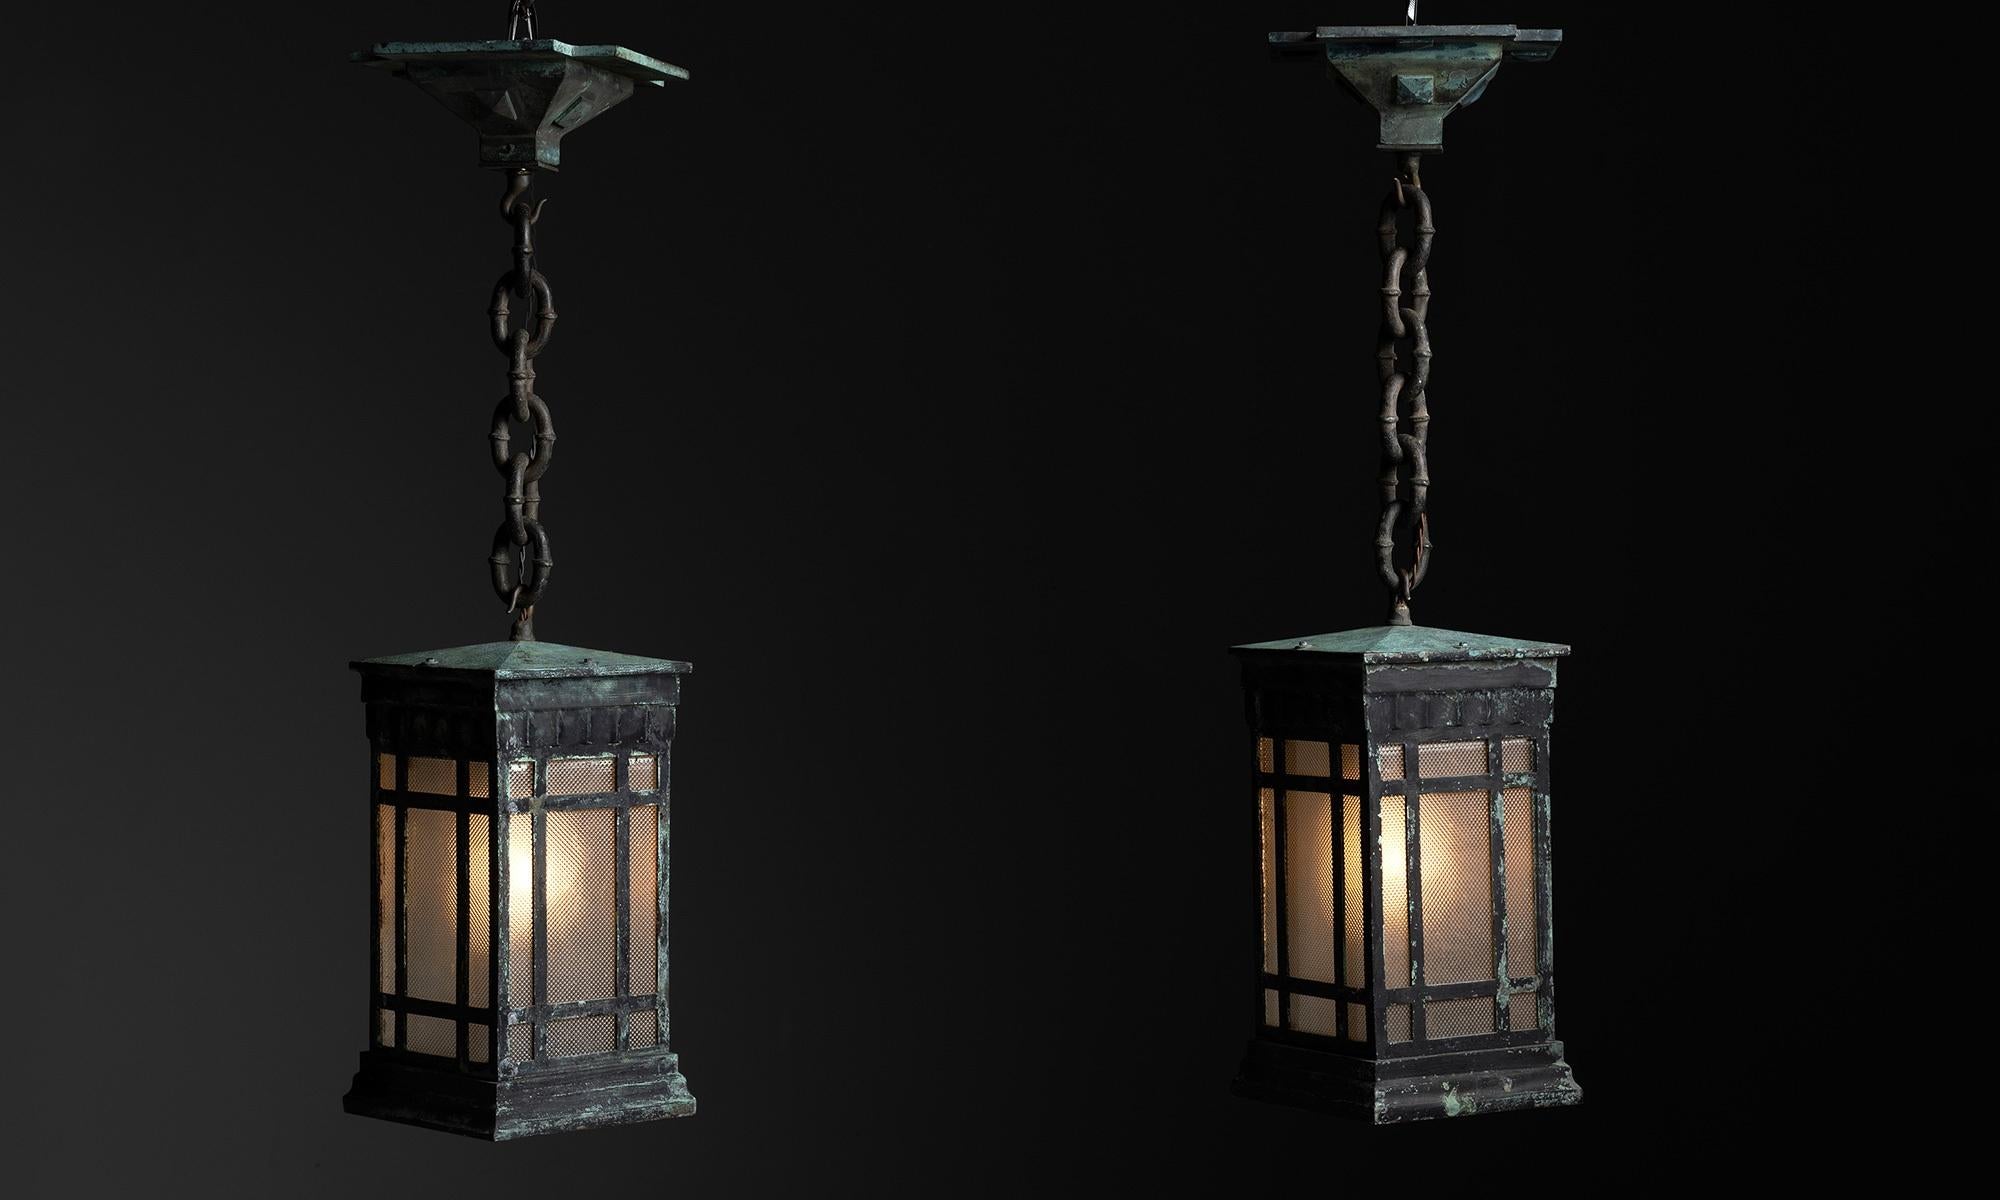 Bronze Garden Lanterns

England circa 1860

Verdigris bronze lanterns with original glass, chain, and canopies.

Measures: 10” L x 10” D x 37.5” H (overall) 16” H (lantern only)

*Please note the price is per unit, and the lights are sold